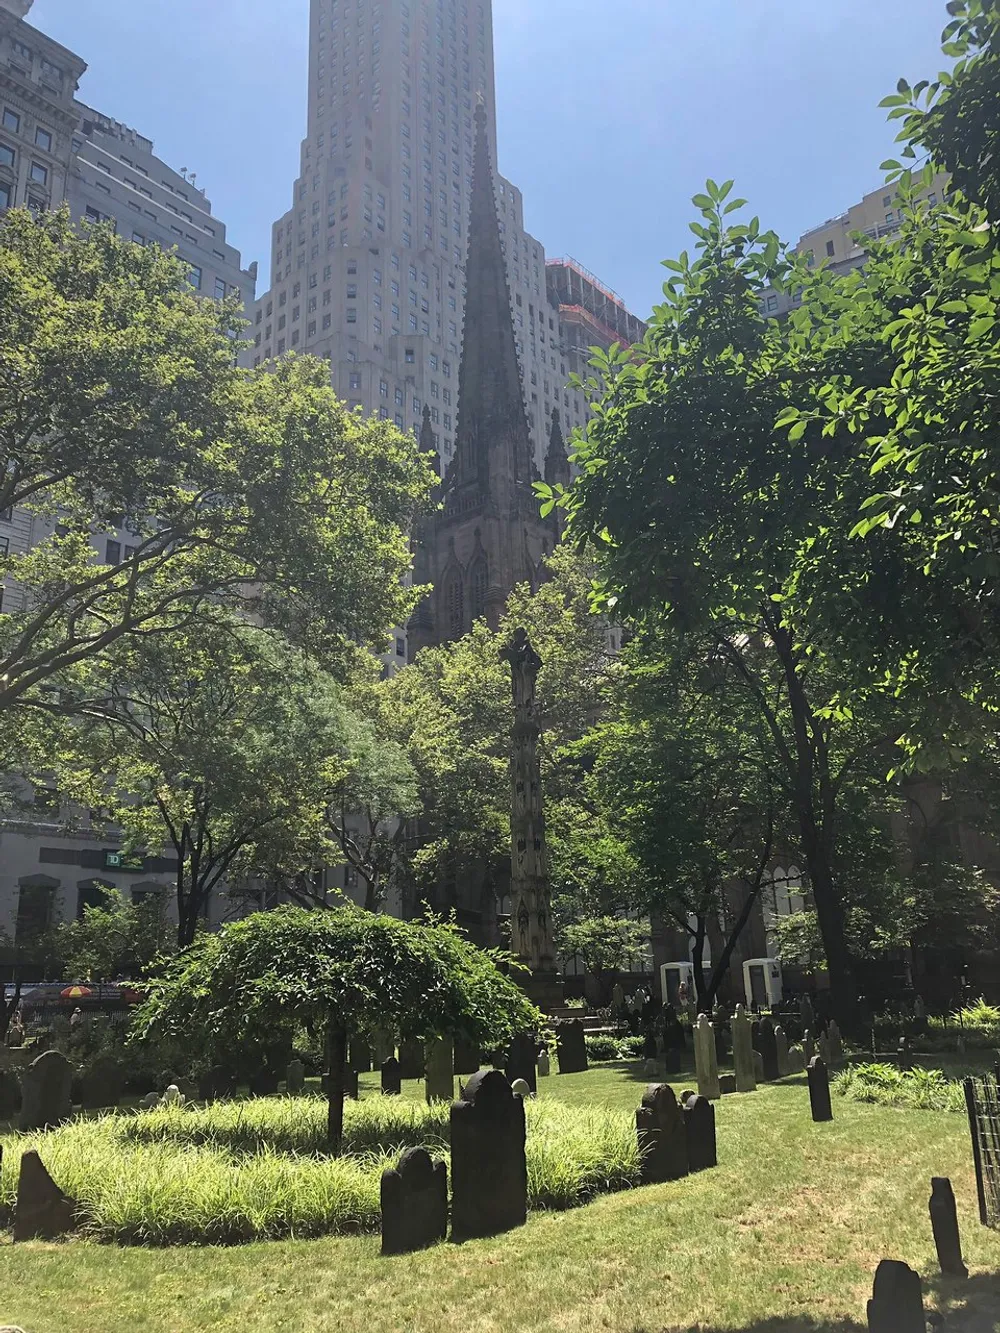 The image shows an urban cemetery with weathered headstones nestled among greenery in the shadow of towering skyscrapers highlighting a contrast between the tranquility of the resting place and the bustling cityscape